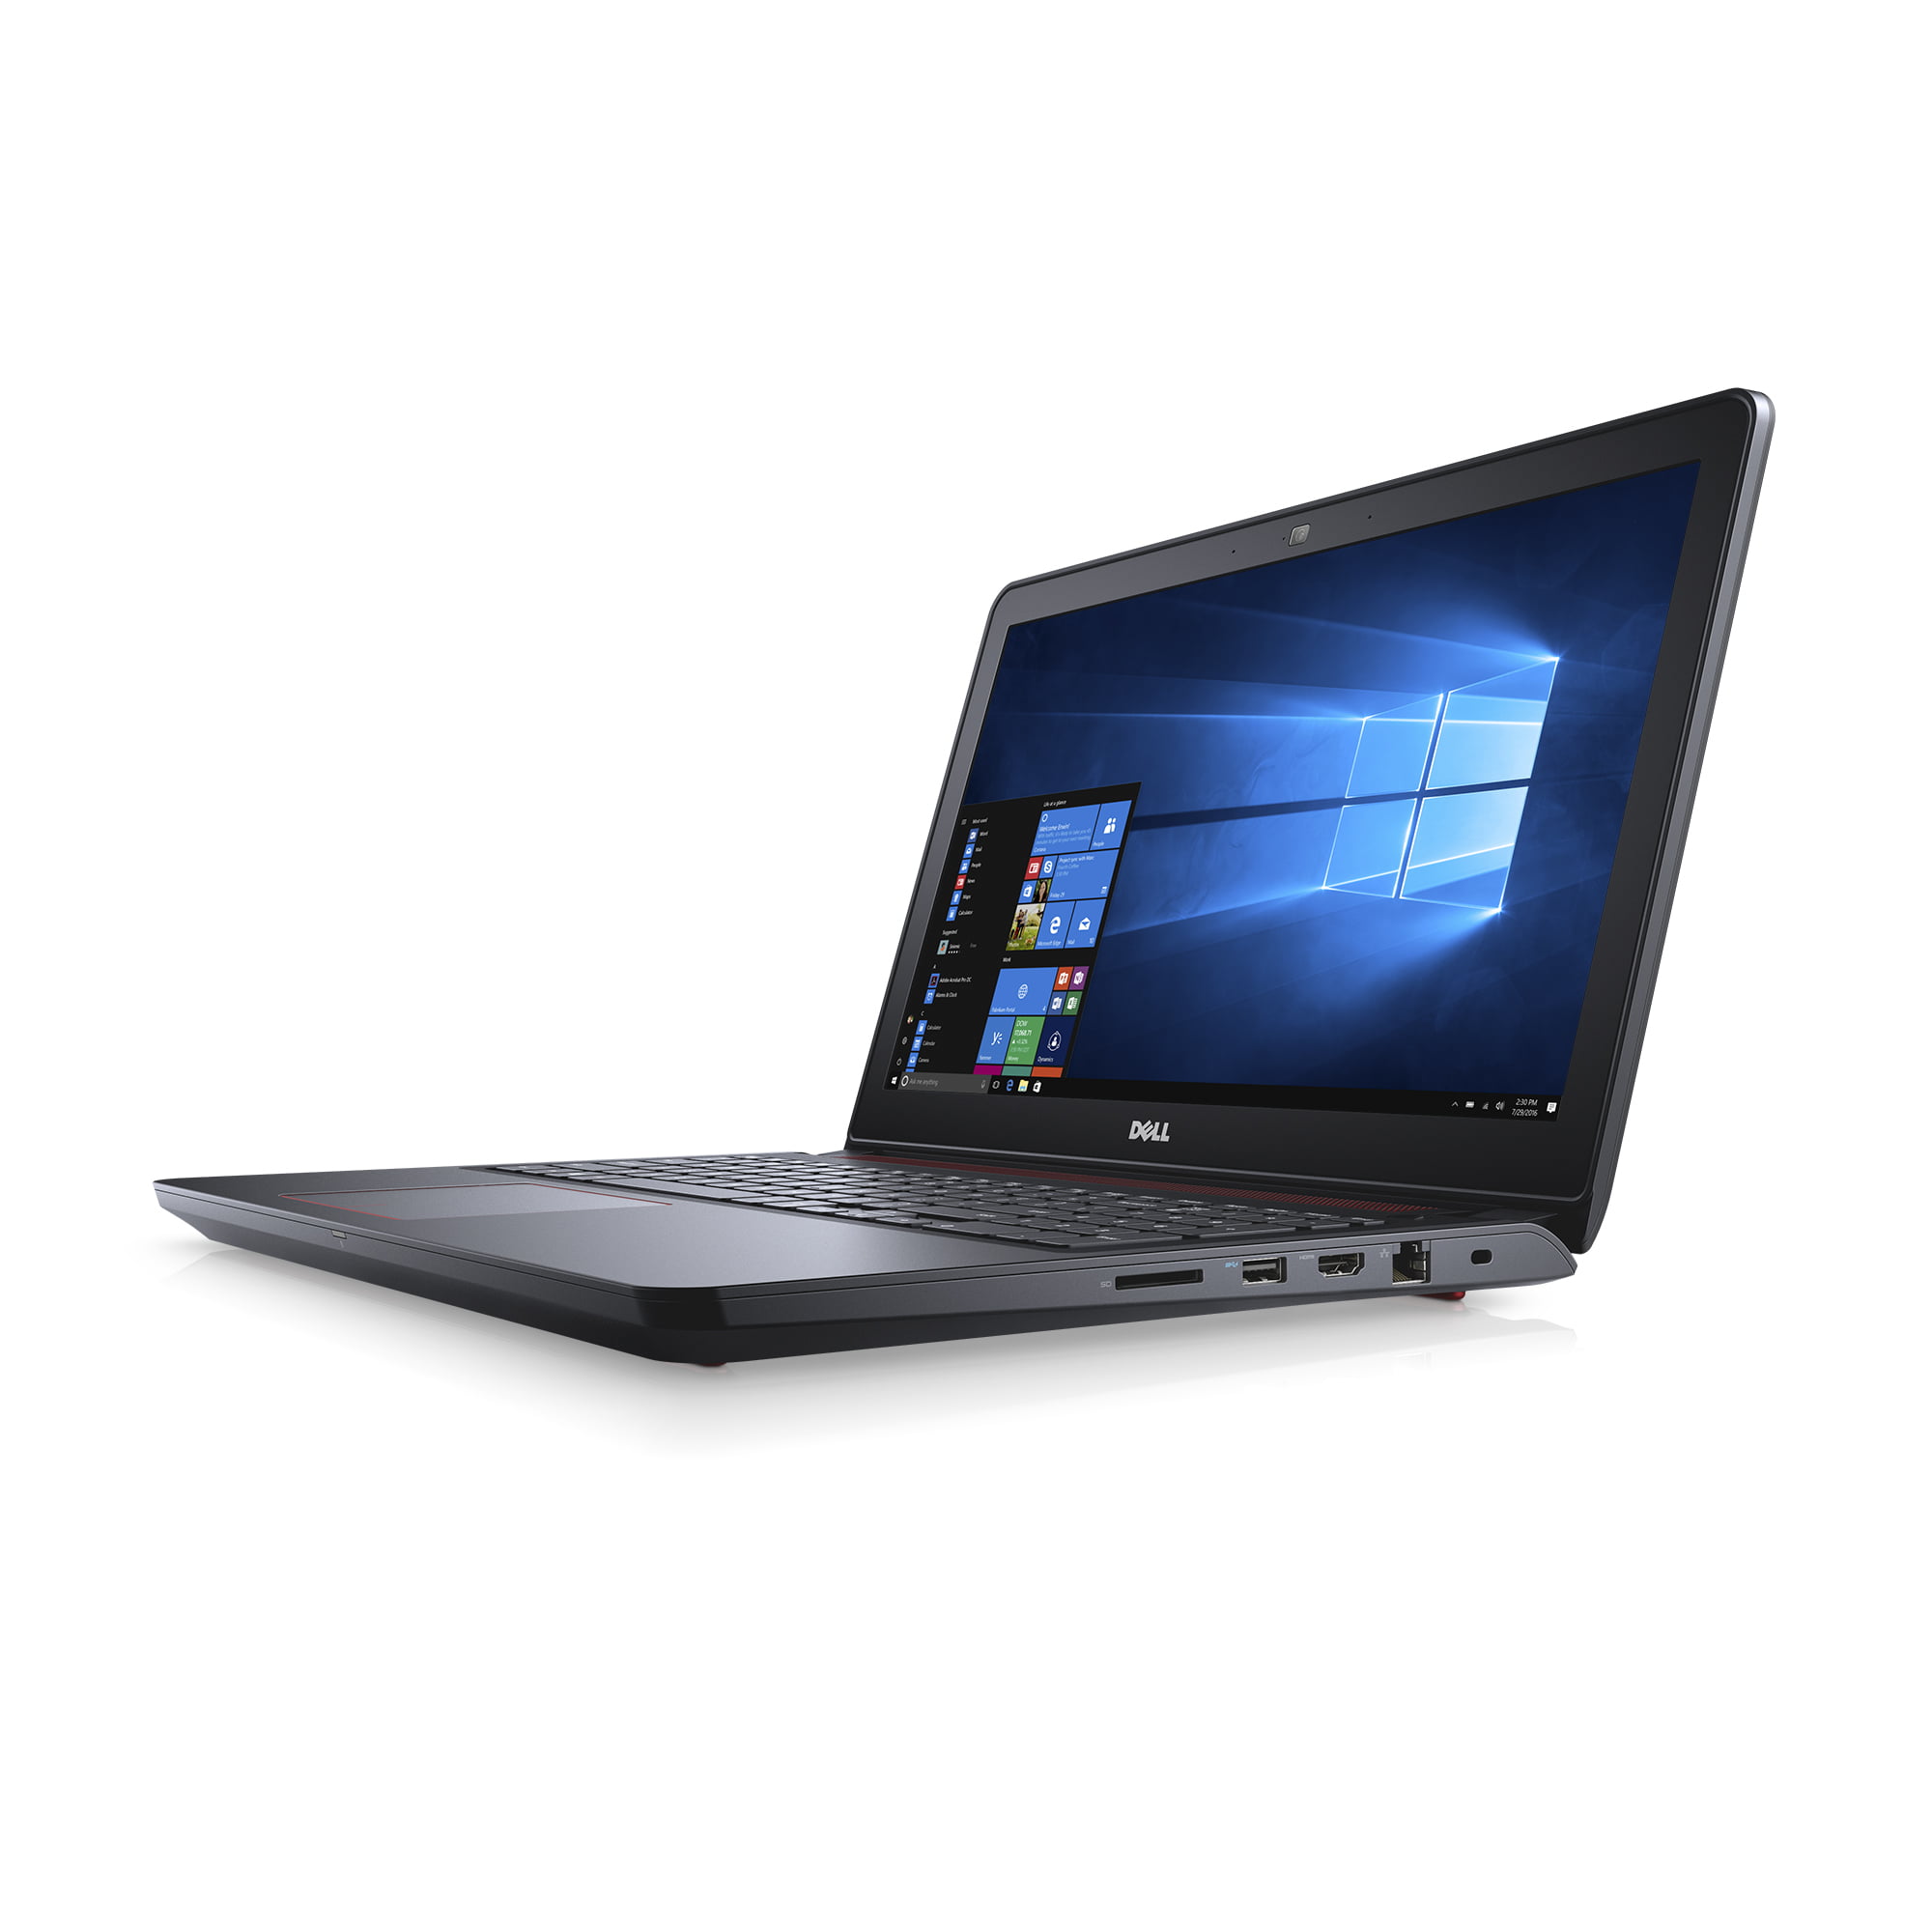 Dell Inspiron 15.6 FHD Touchscreen Truelife LED-Backlit Display Laptop  10th Gen Intel Core i7-1065G7 12GB RAM 1TB HDD WiFi B ノートパソコン 